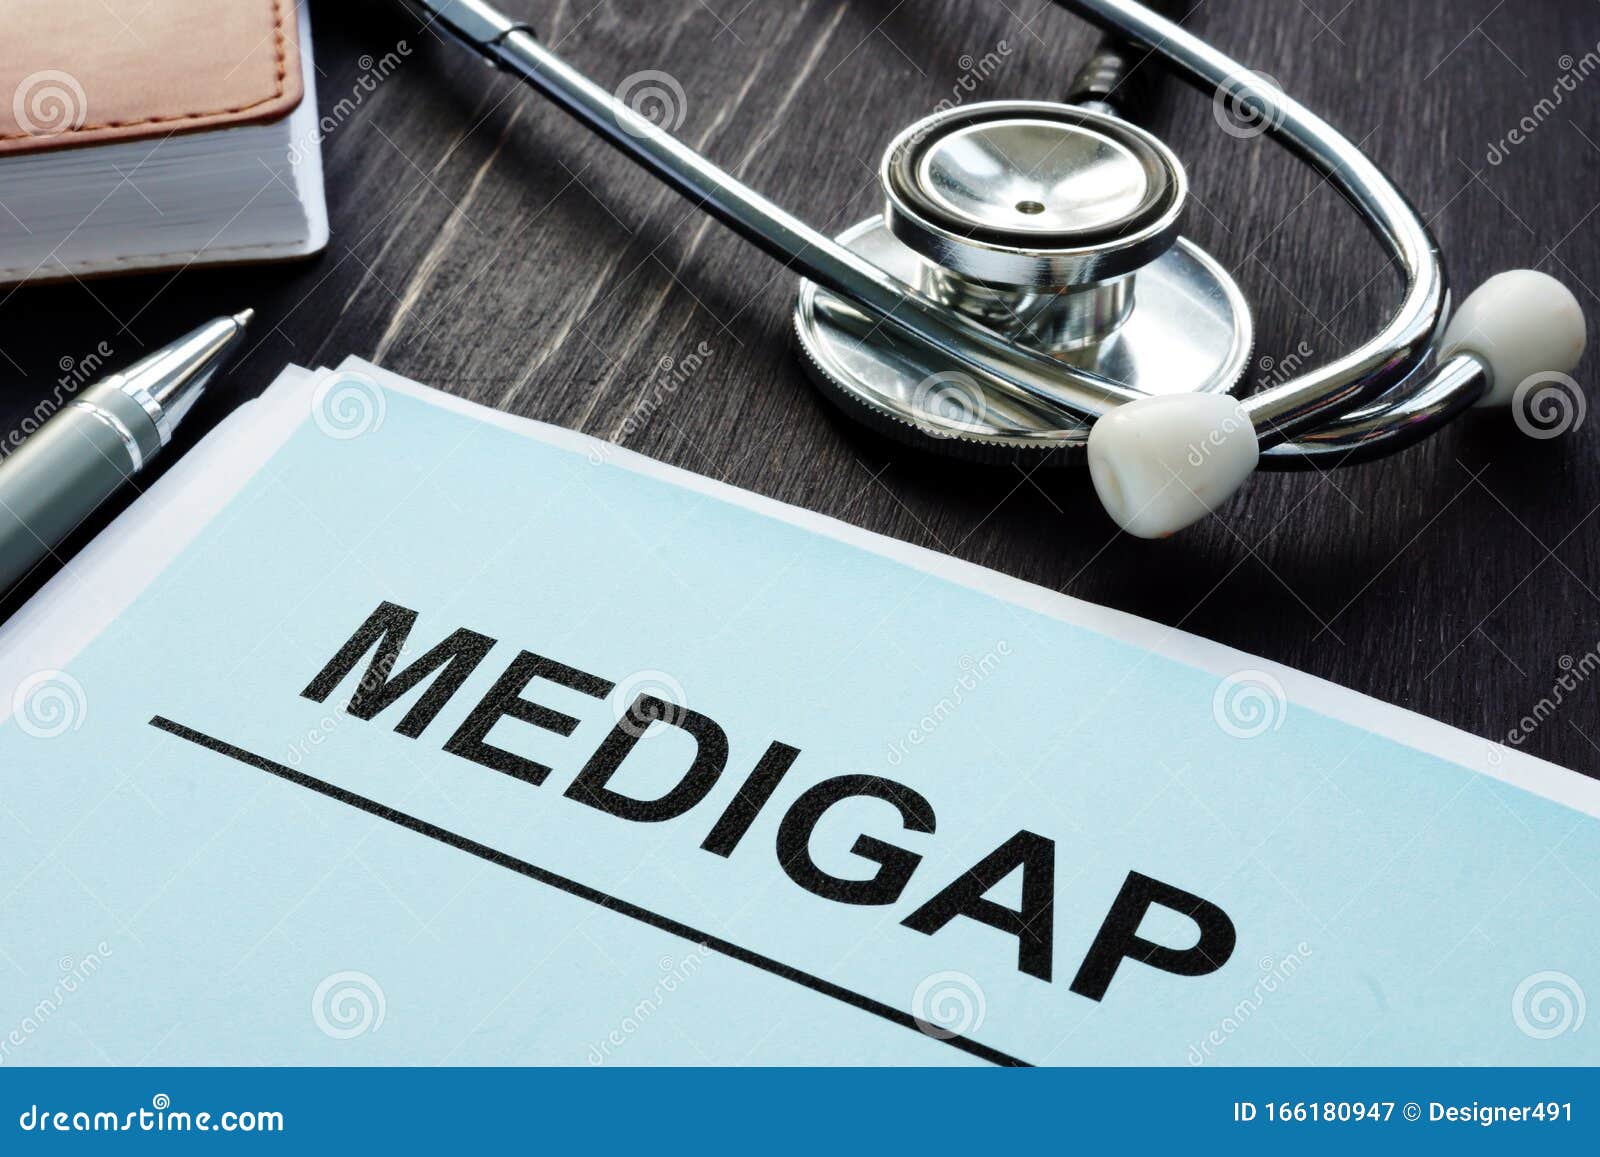 medigap supplement health insurance papers